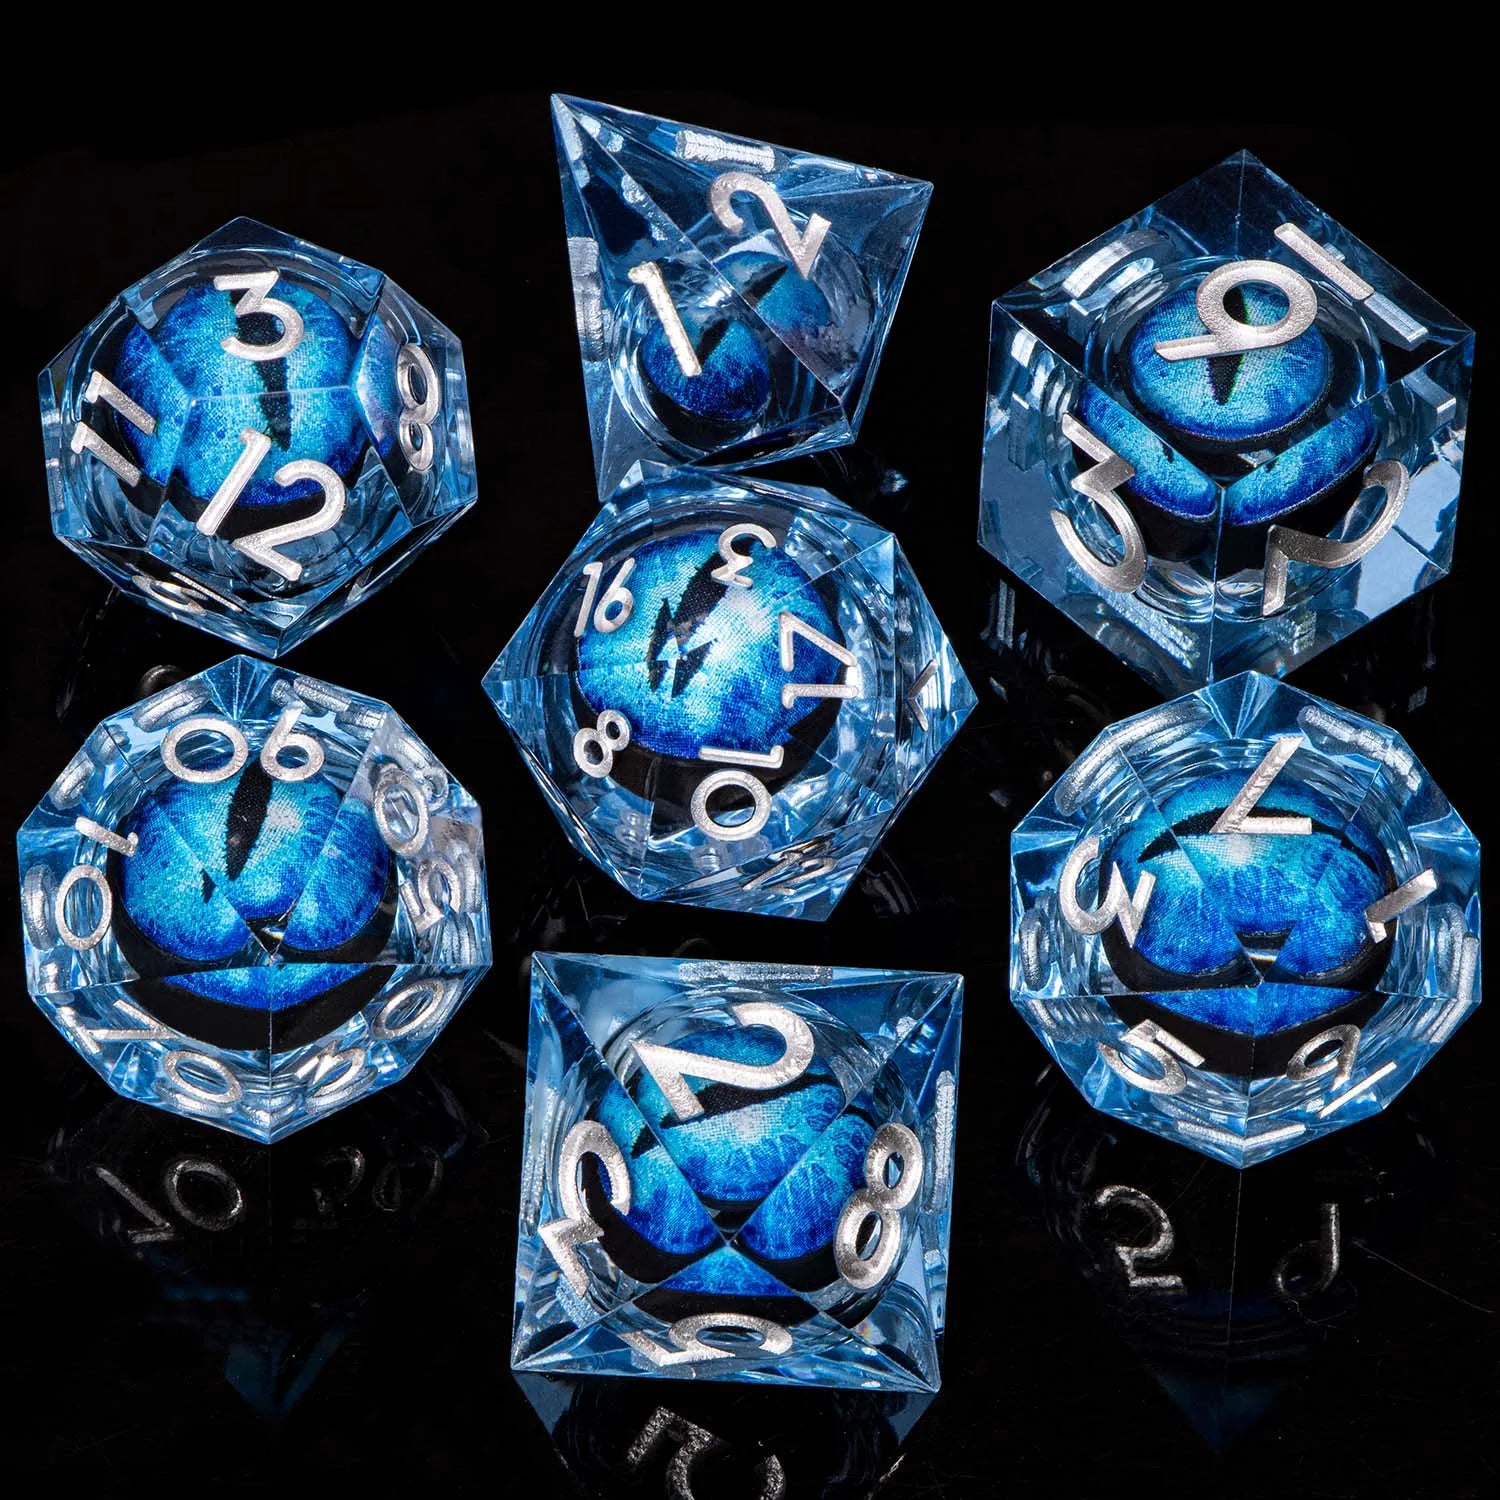 D and D Beholder's Liquid Flow Core Eye Resin Dice Set | Dnd Dungeon and Dragon Pathfinder Role Playing Game Dice | D20 D&D Dice YY-05